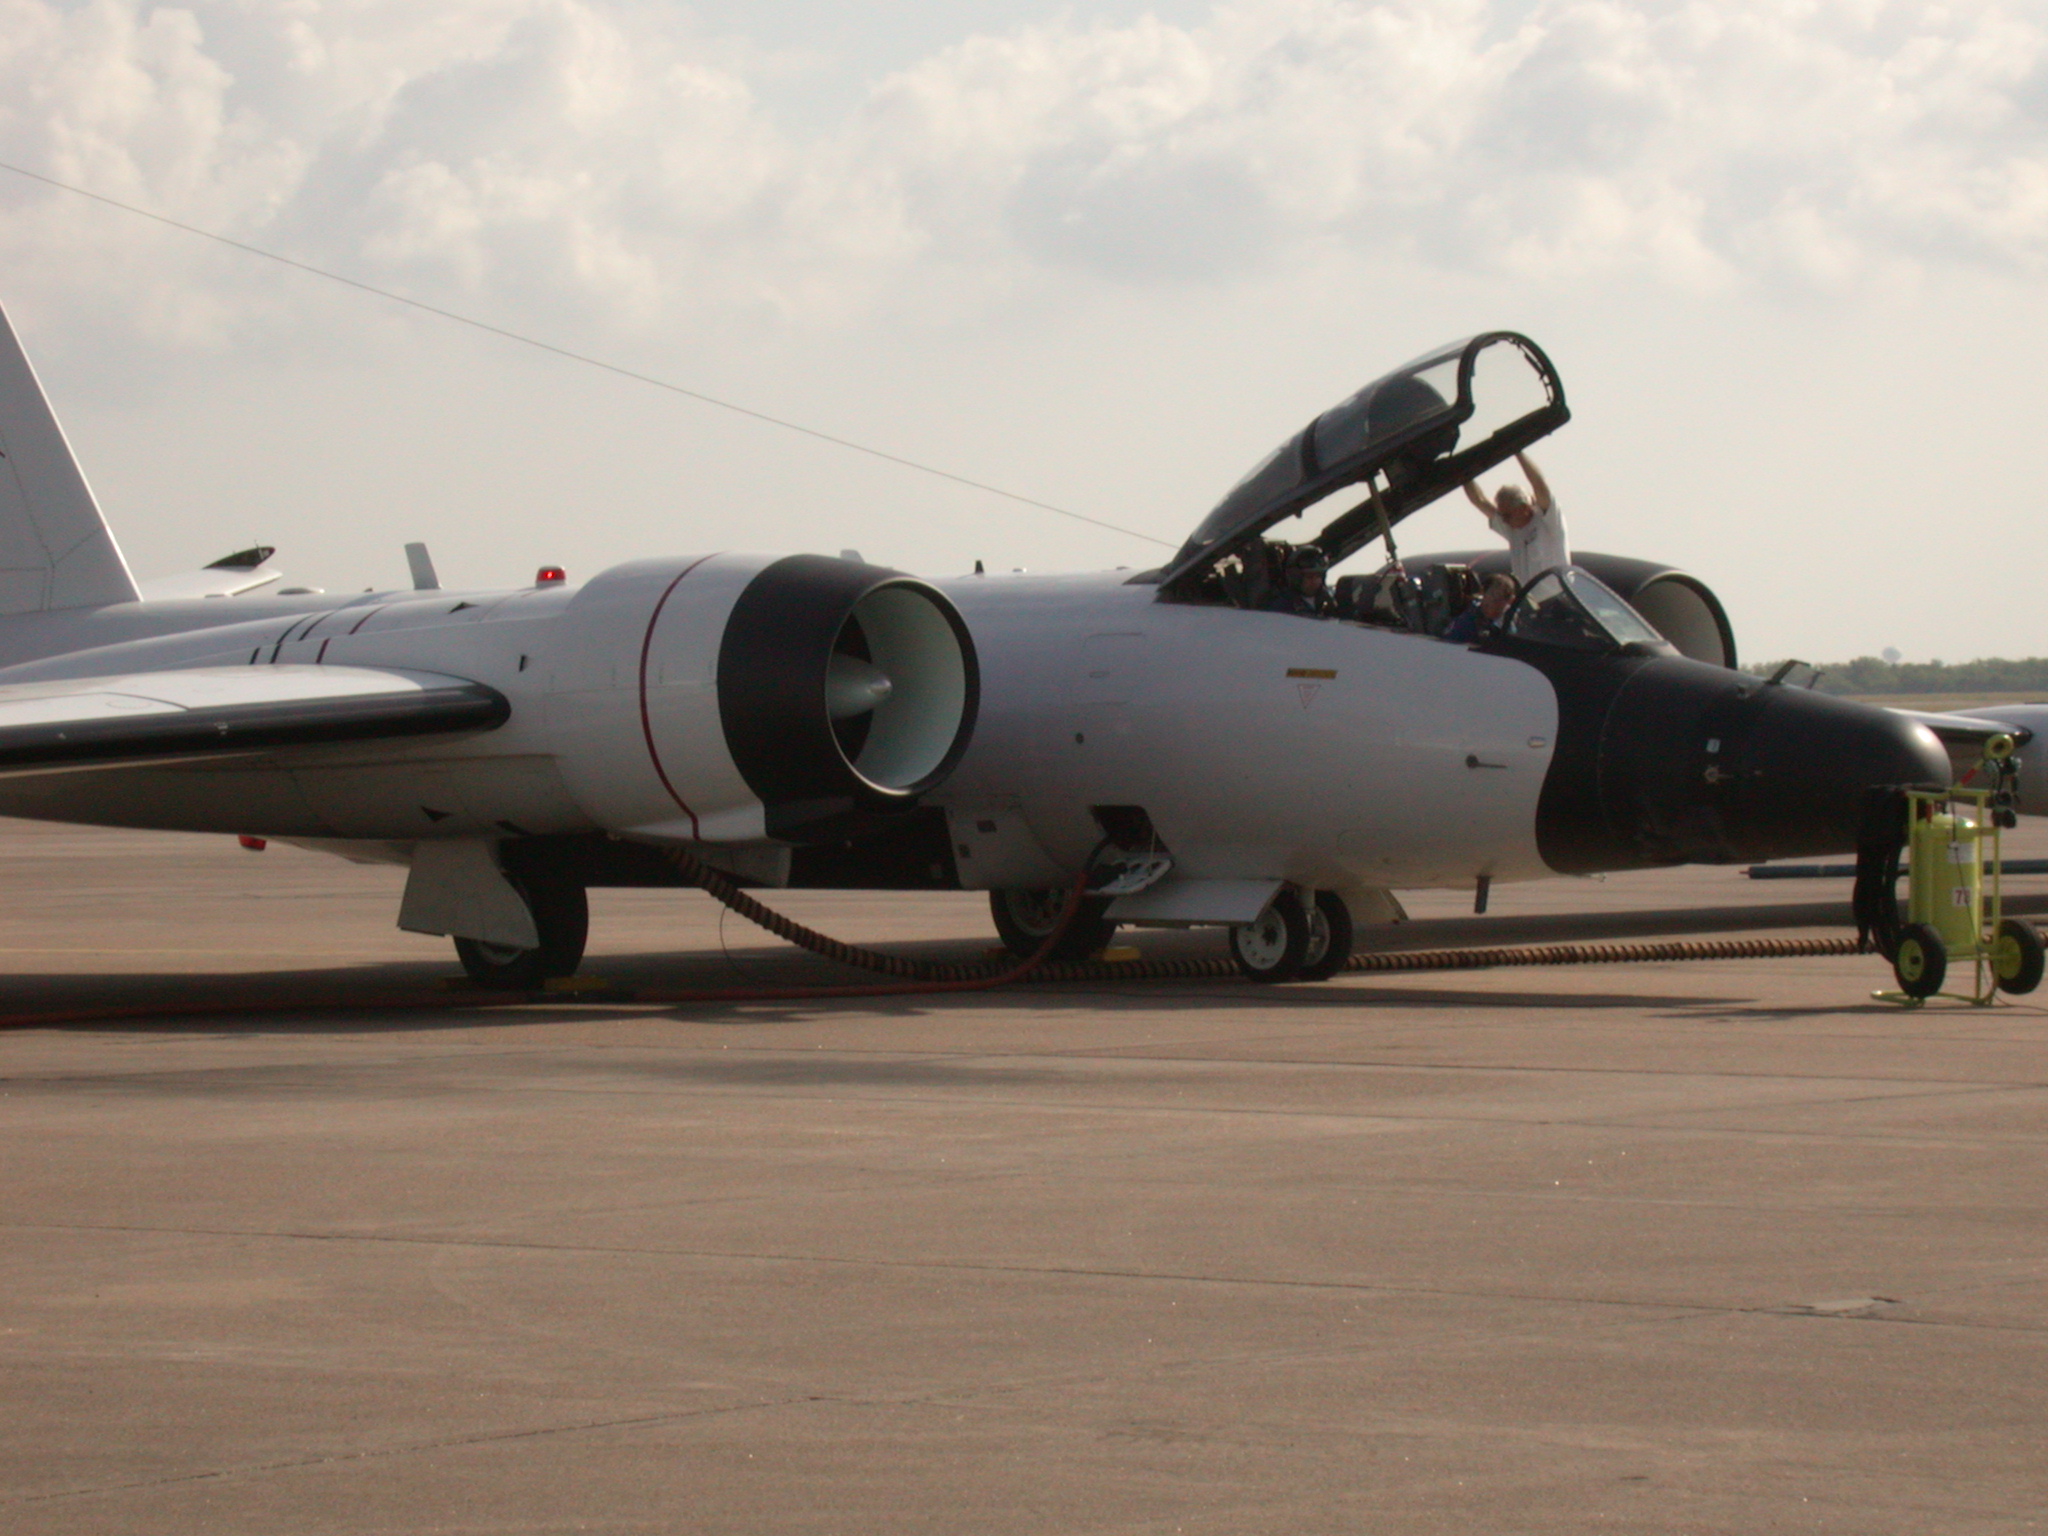 A Texas-based NASA WB-57 research jet is prepared for a recent flight into high-level cirrus clouds over Oklahoma during an experiment led by University of Utah meteorologists.